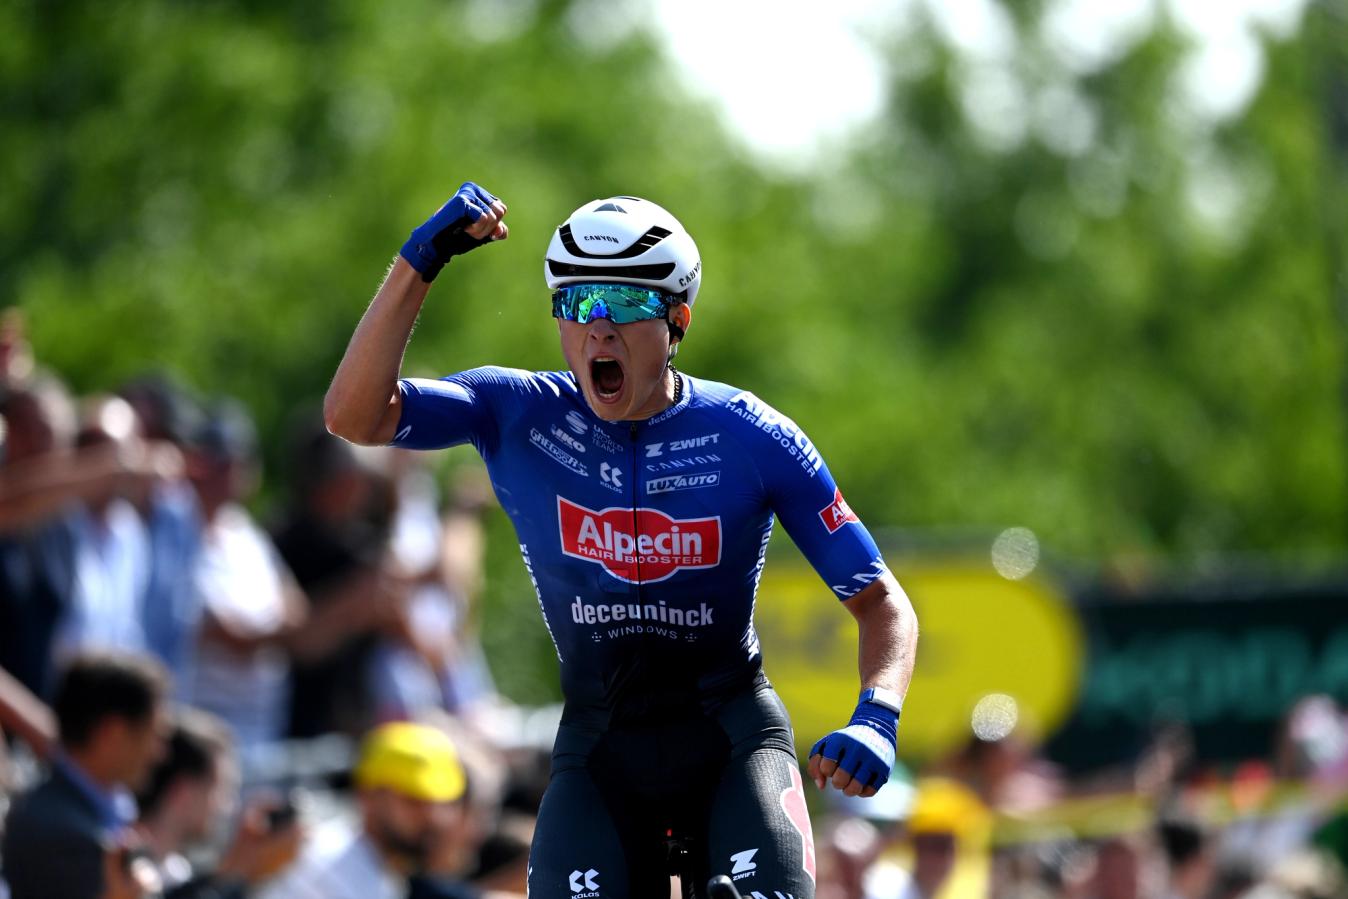 Philipsen won back-to-back sprints on stages 3 and 4 of the Tour de France